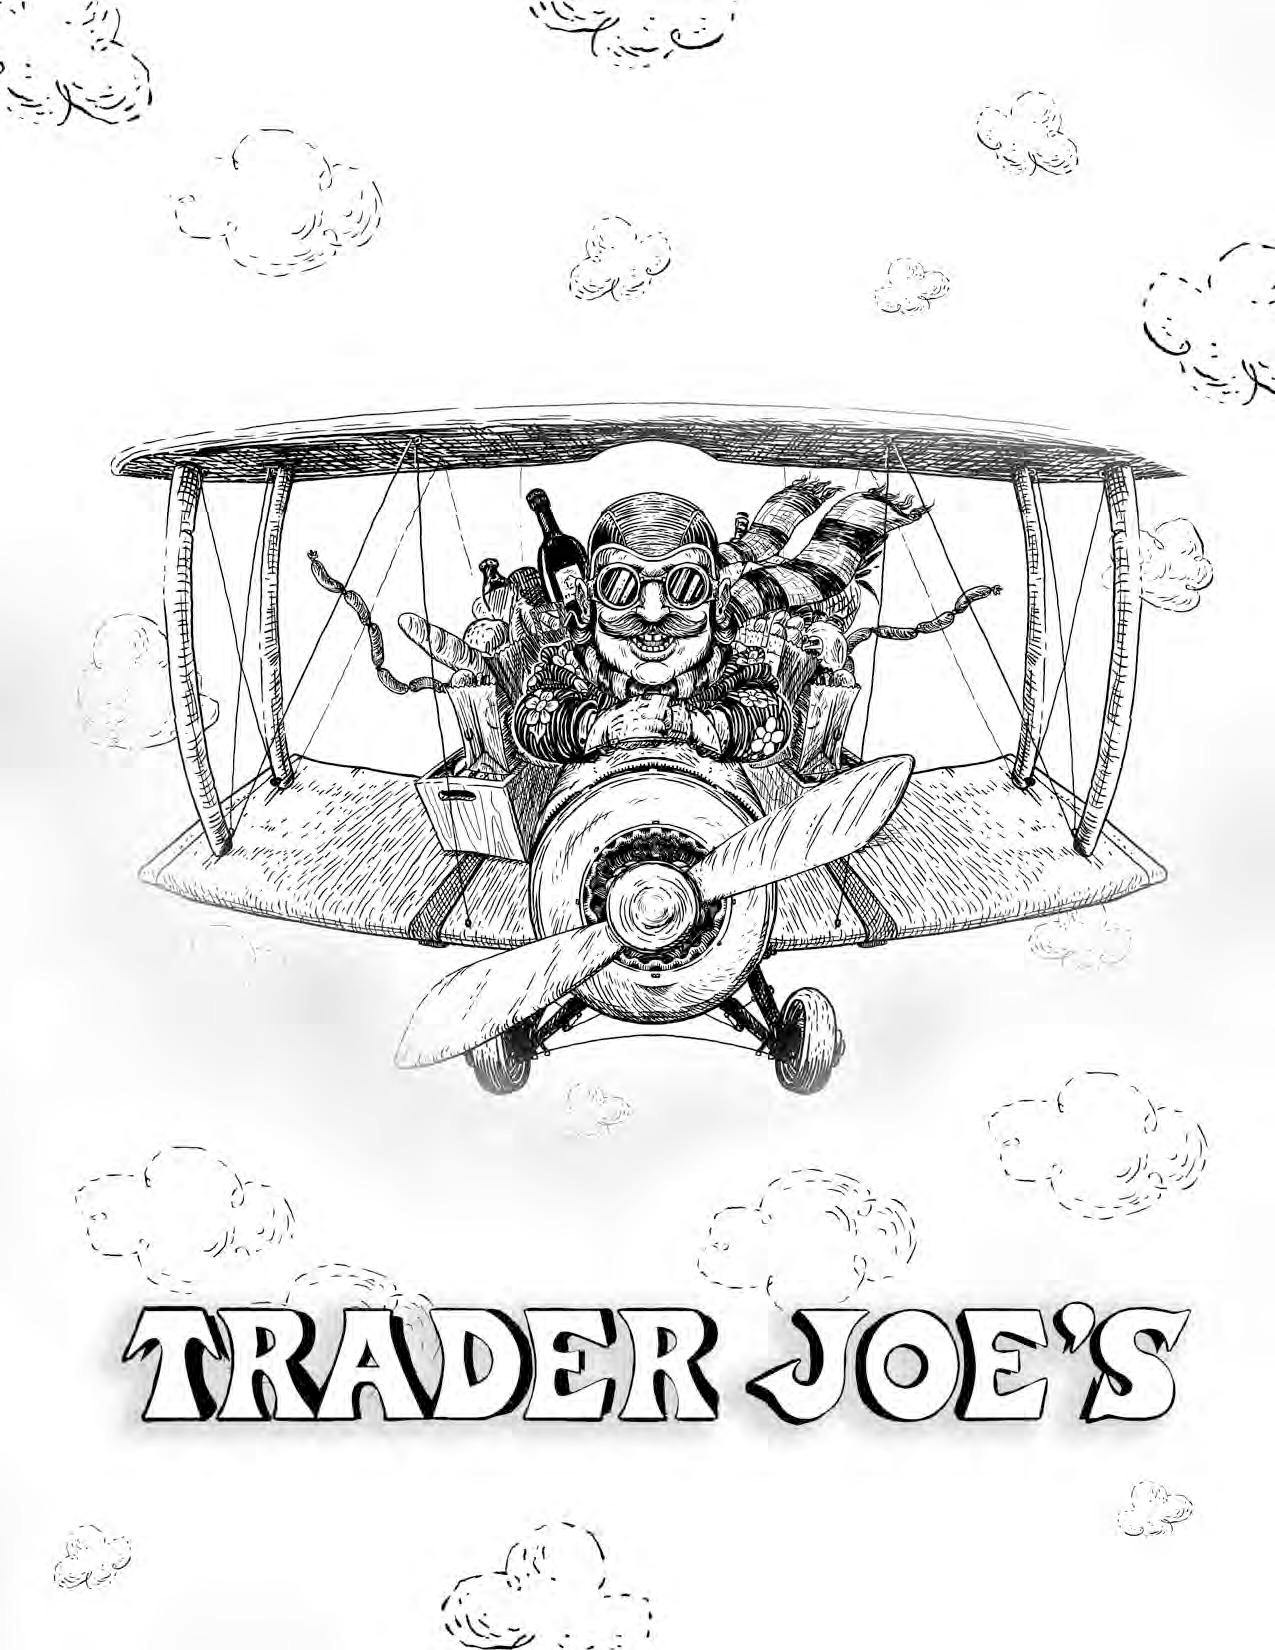 Trader Joes coloring page man flying in airplane high in the clouds